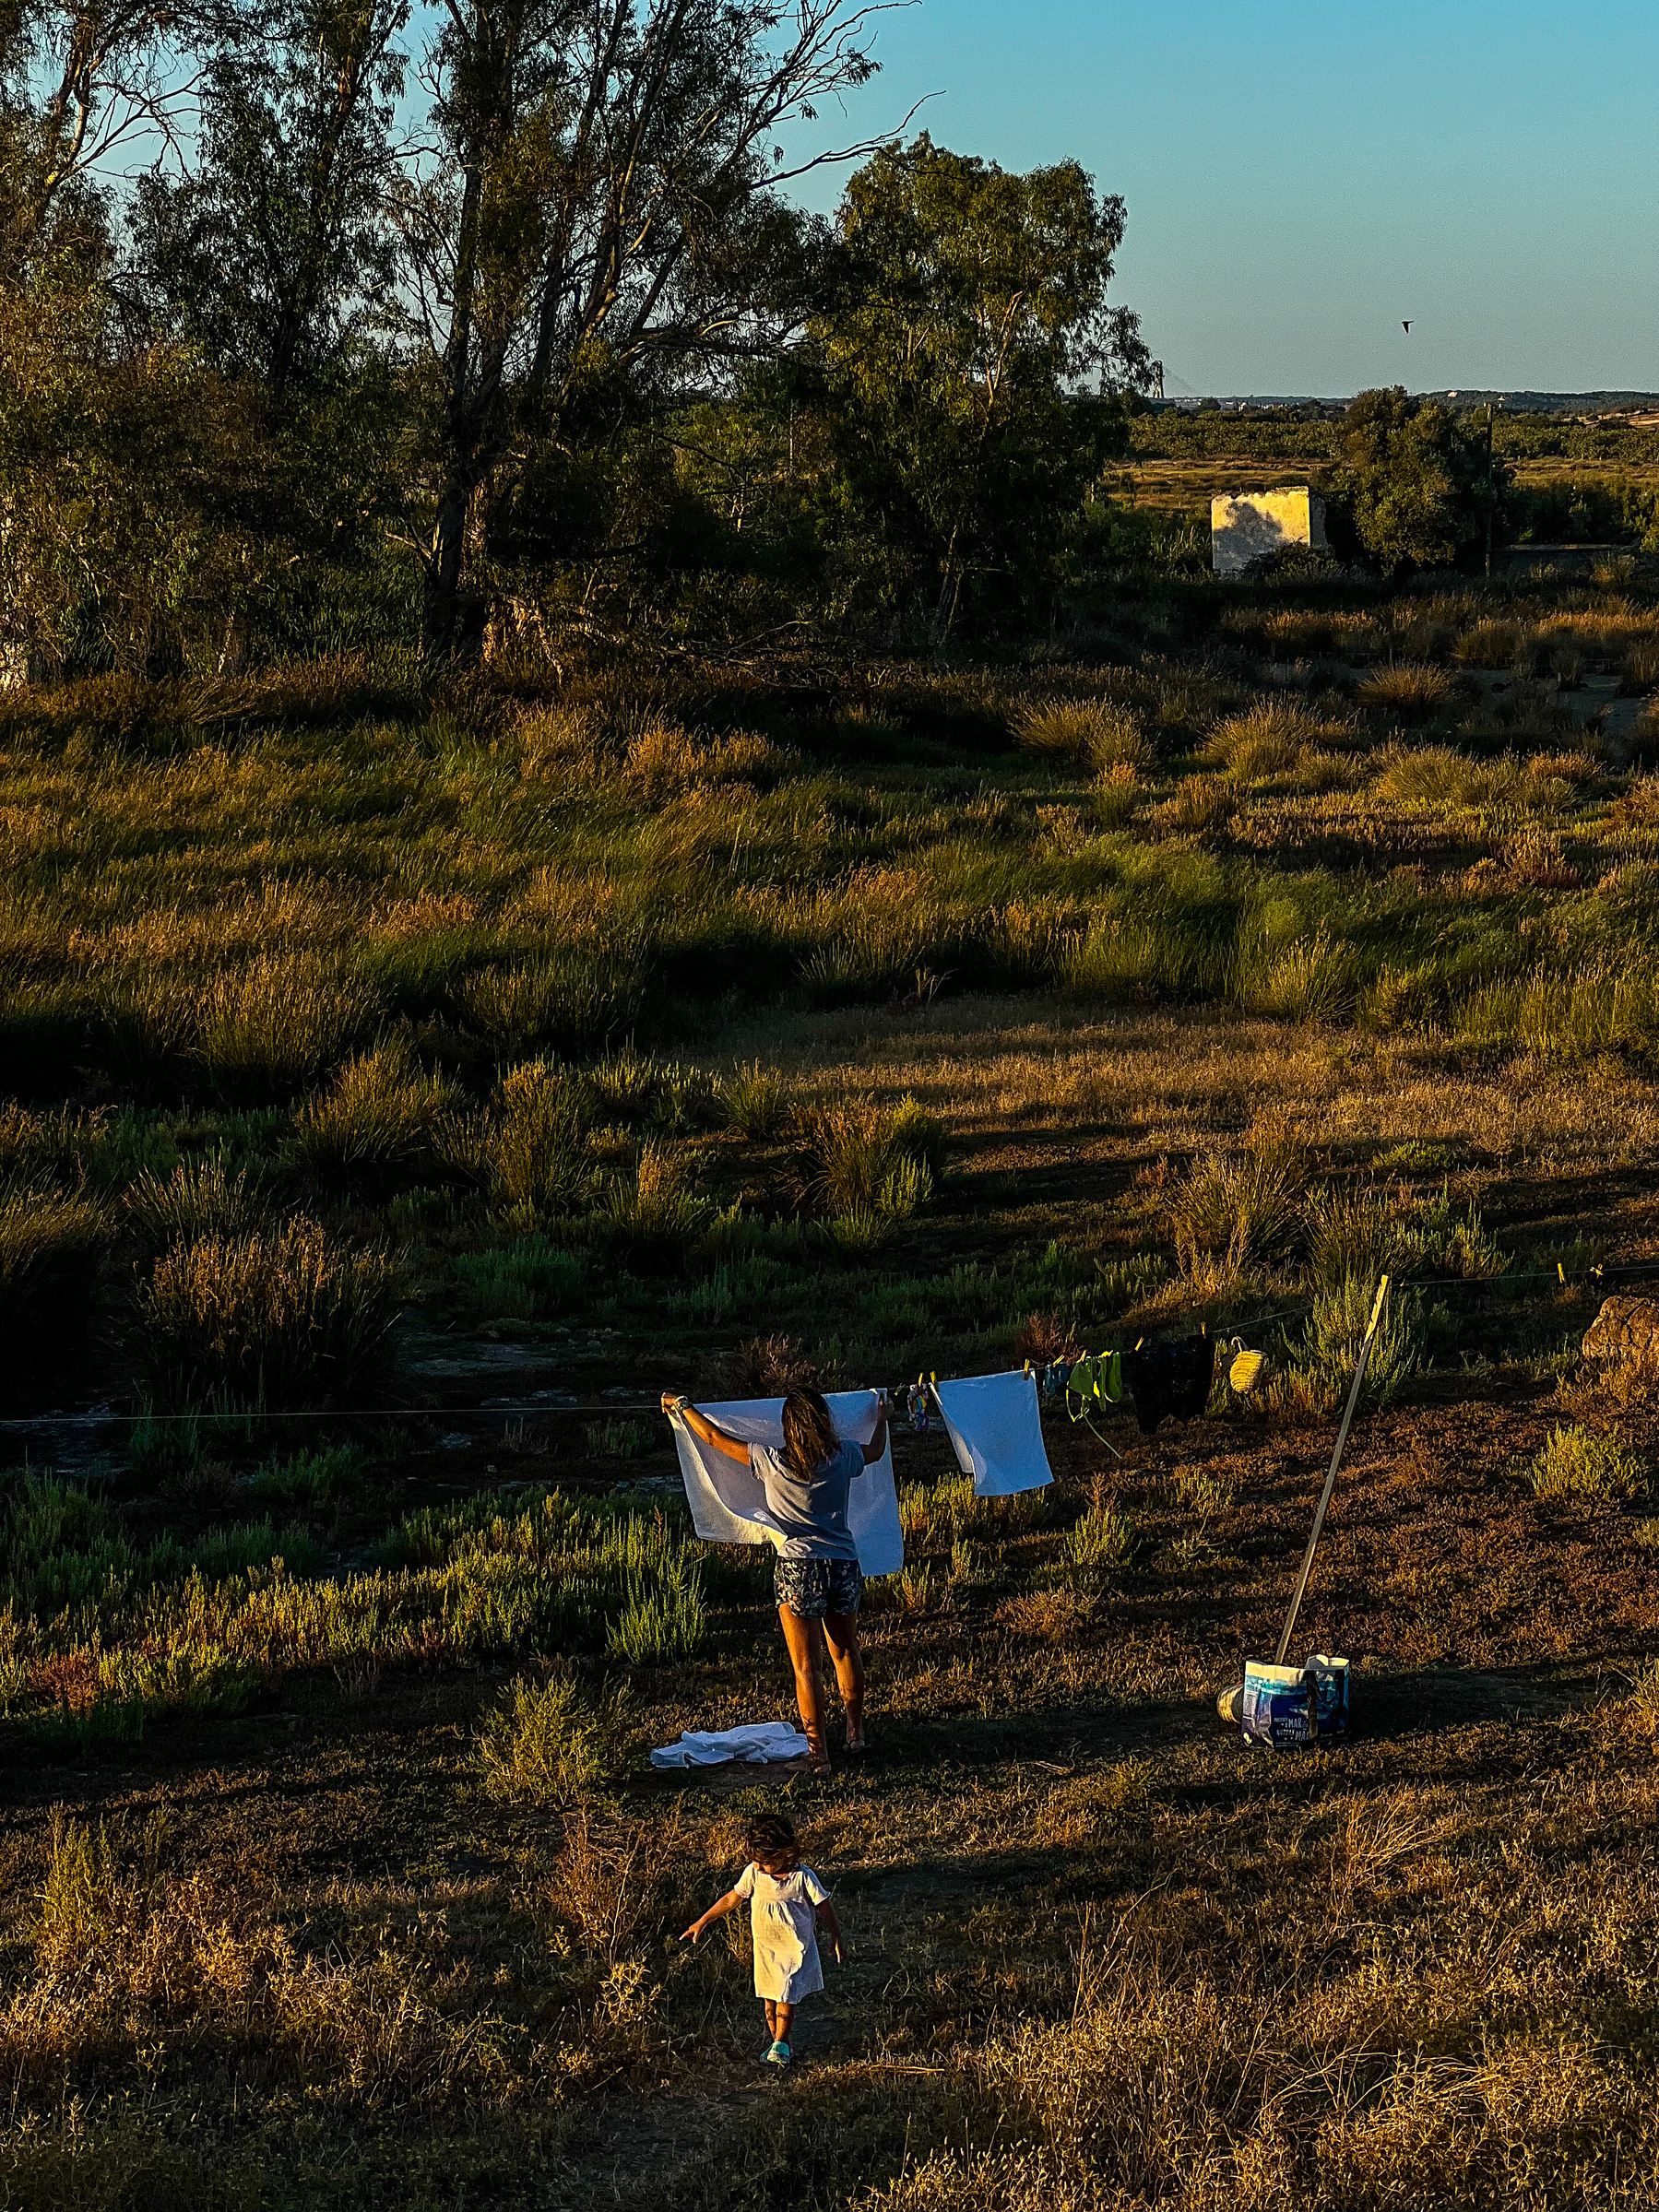 a woman hangs laundry to dry in the field, with a toddler close by